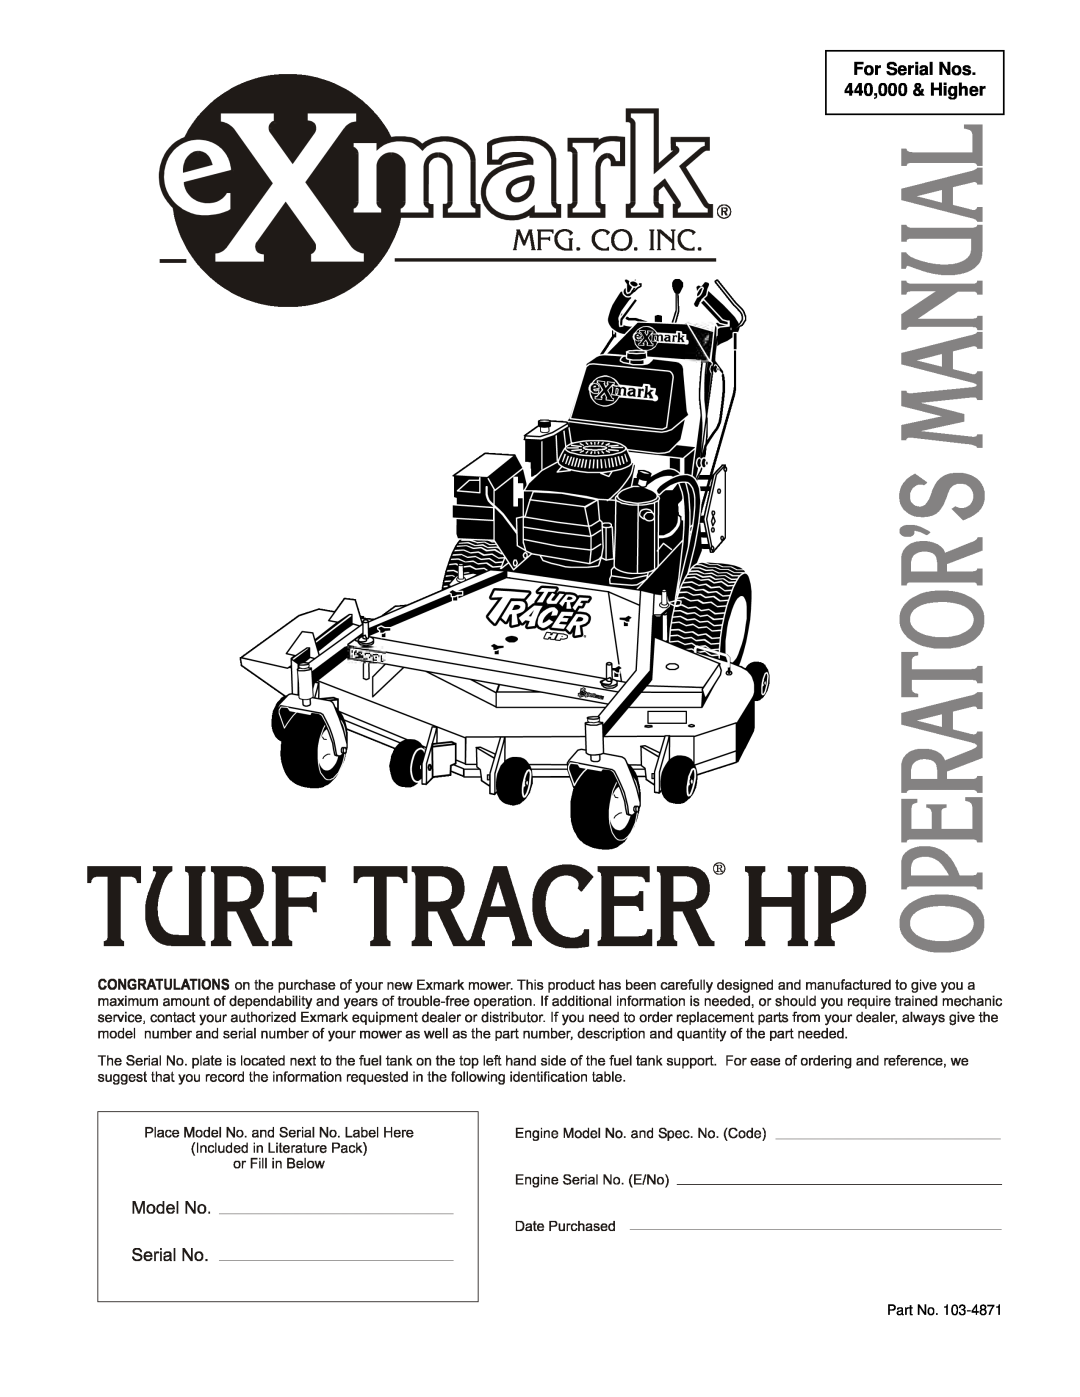 Exmark Turf Tracer HP manual For Serial Nos 440,000 & Higher 